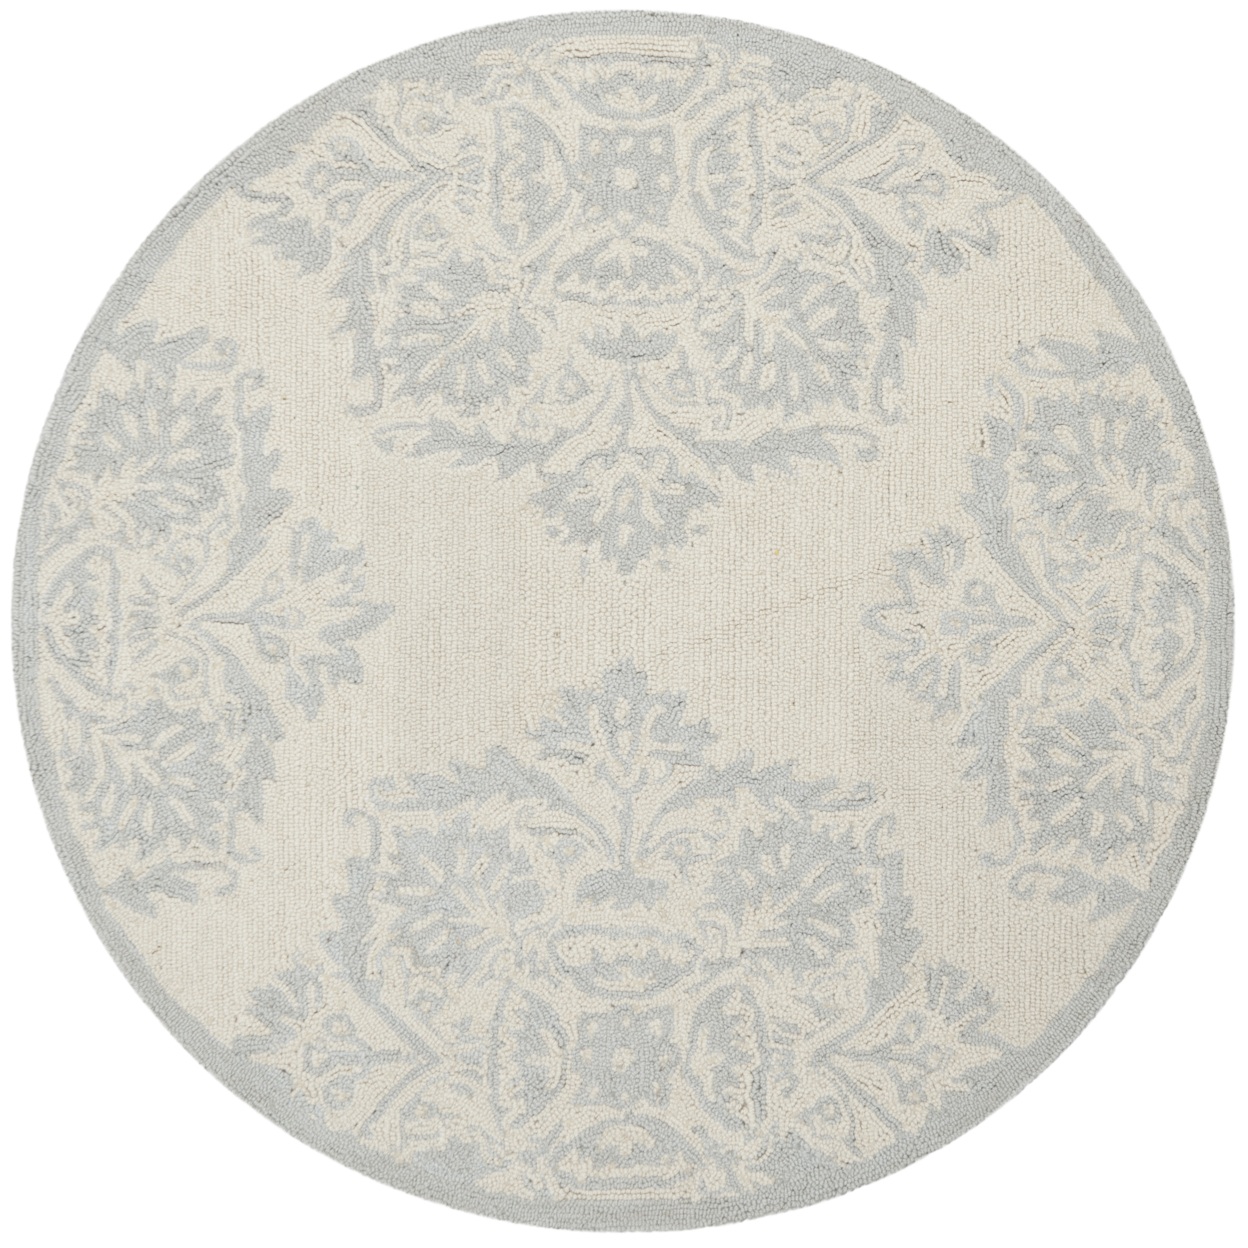 SAFAVIEH Chelsea HK359A Hand-hooked Ivory / Blue Rug - 3' 9 X 5' 9